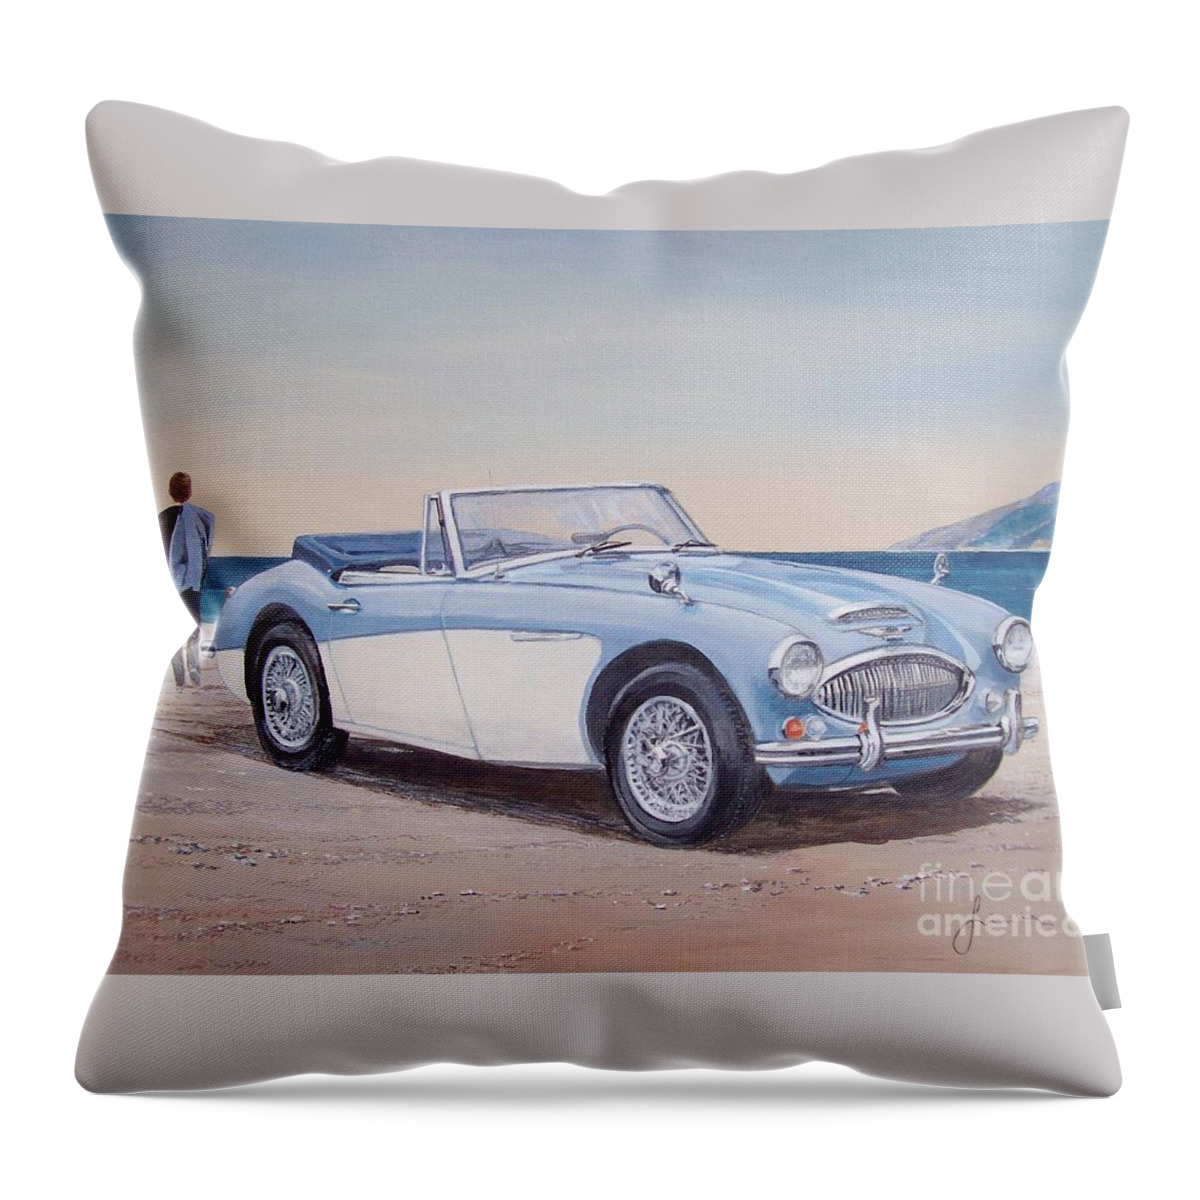 Austin Healey Throw Pillow featuring the painting 1967 Austin Healey by Sinisa Saratlic